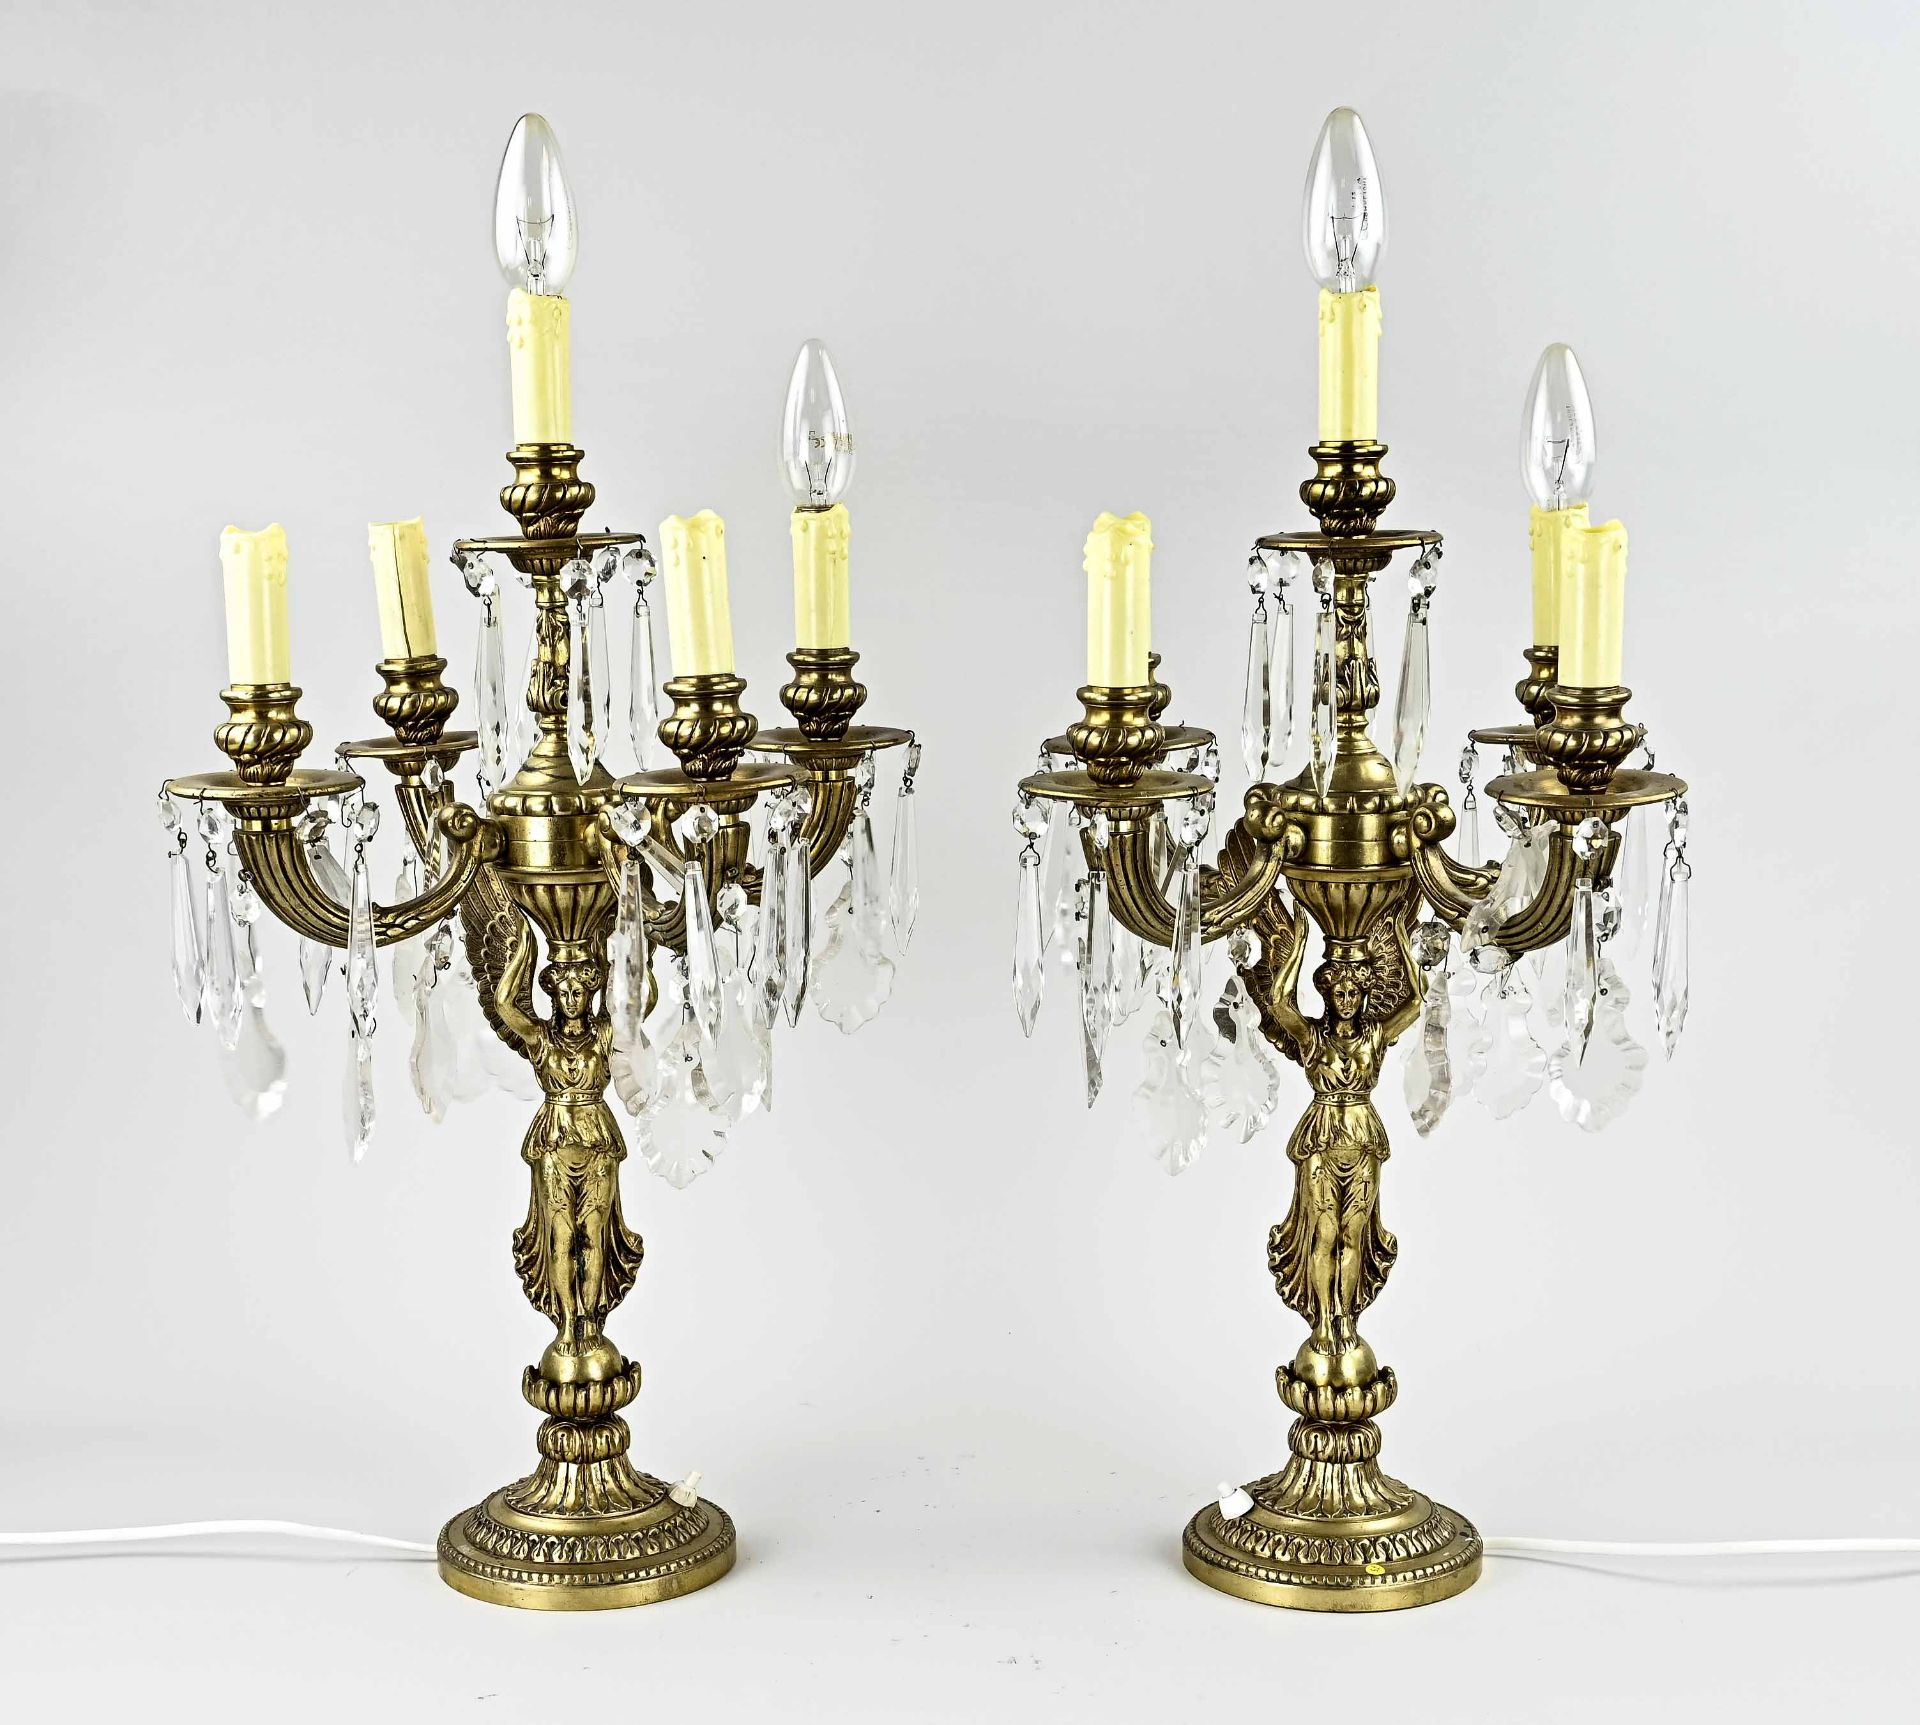 Two bronze table lamps, H 61 cm.